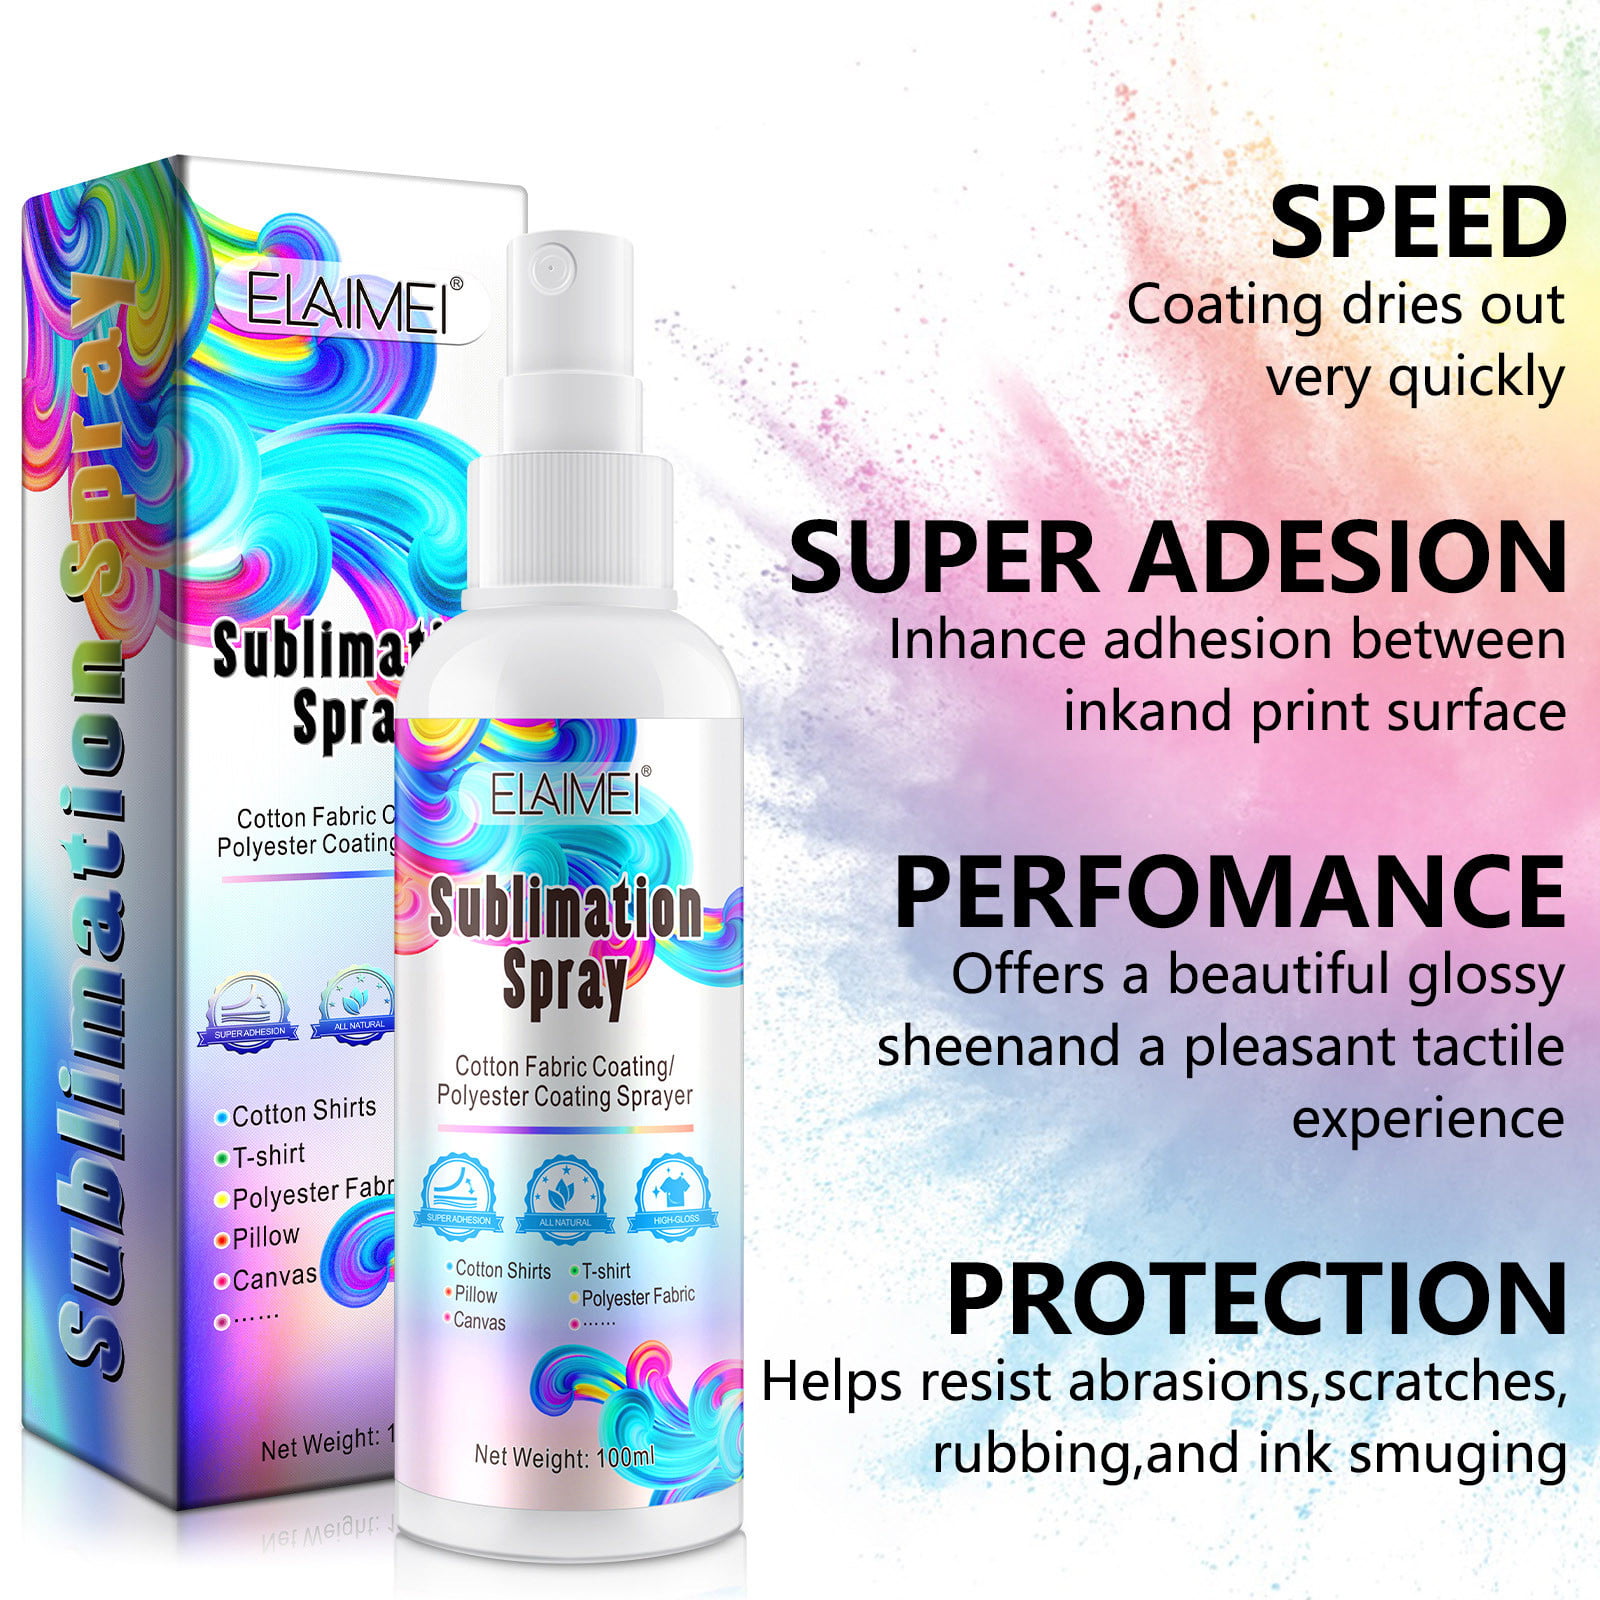 Sublimation spray for Cotton and cotton blends- 3oz concentrate